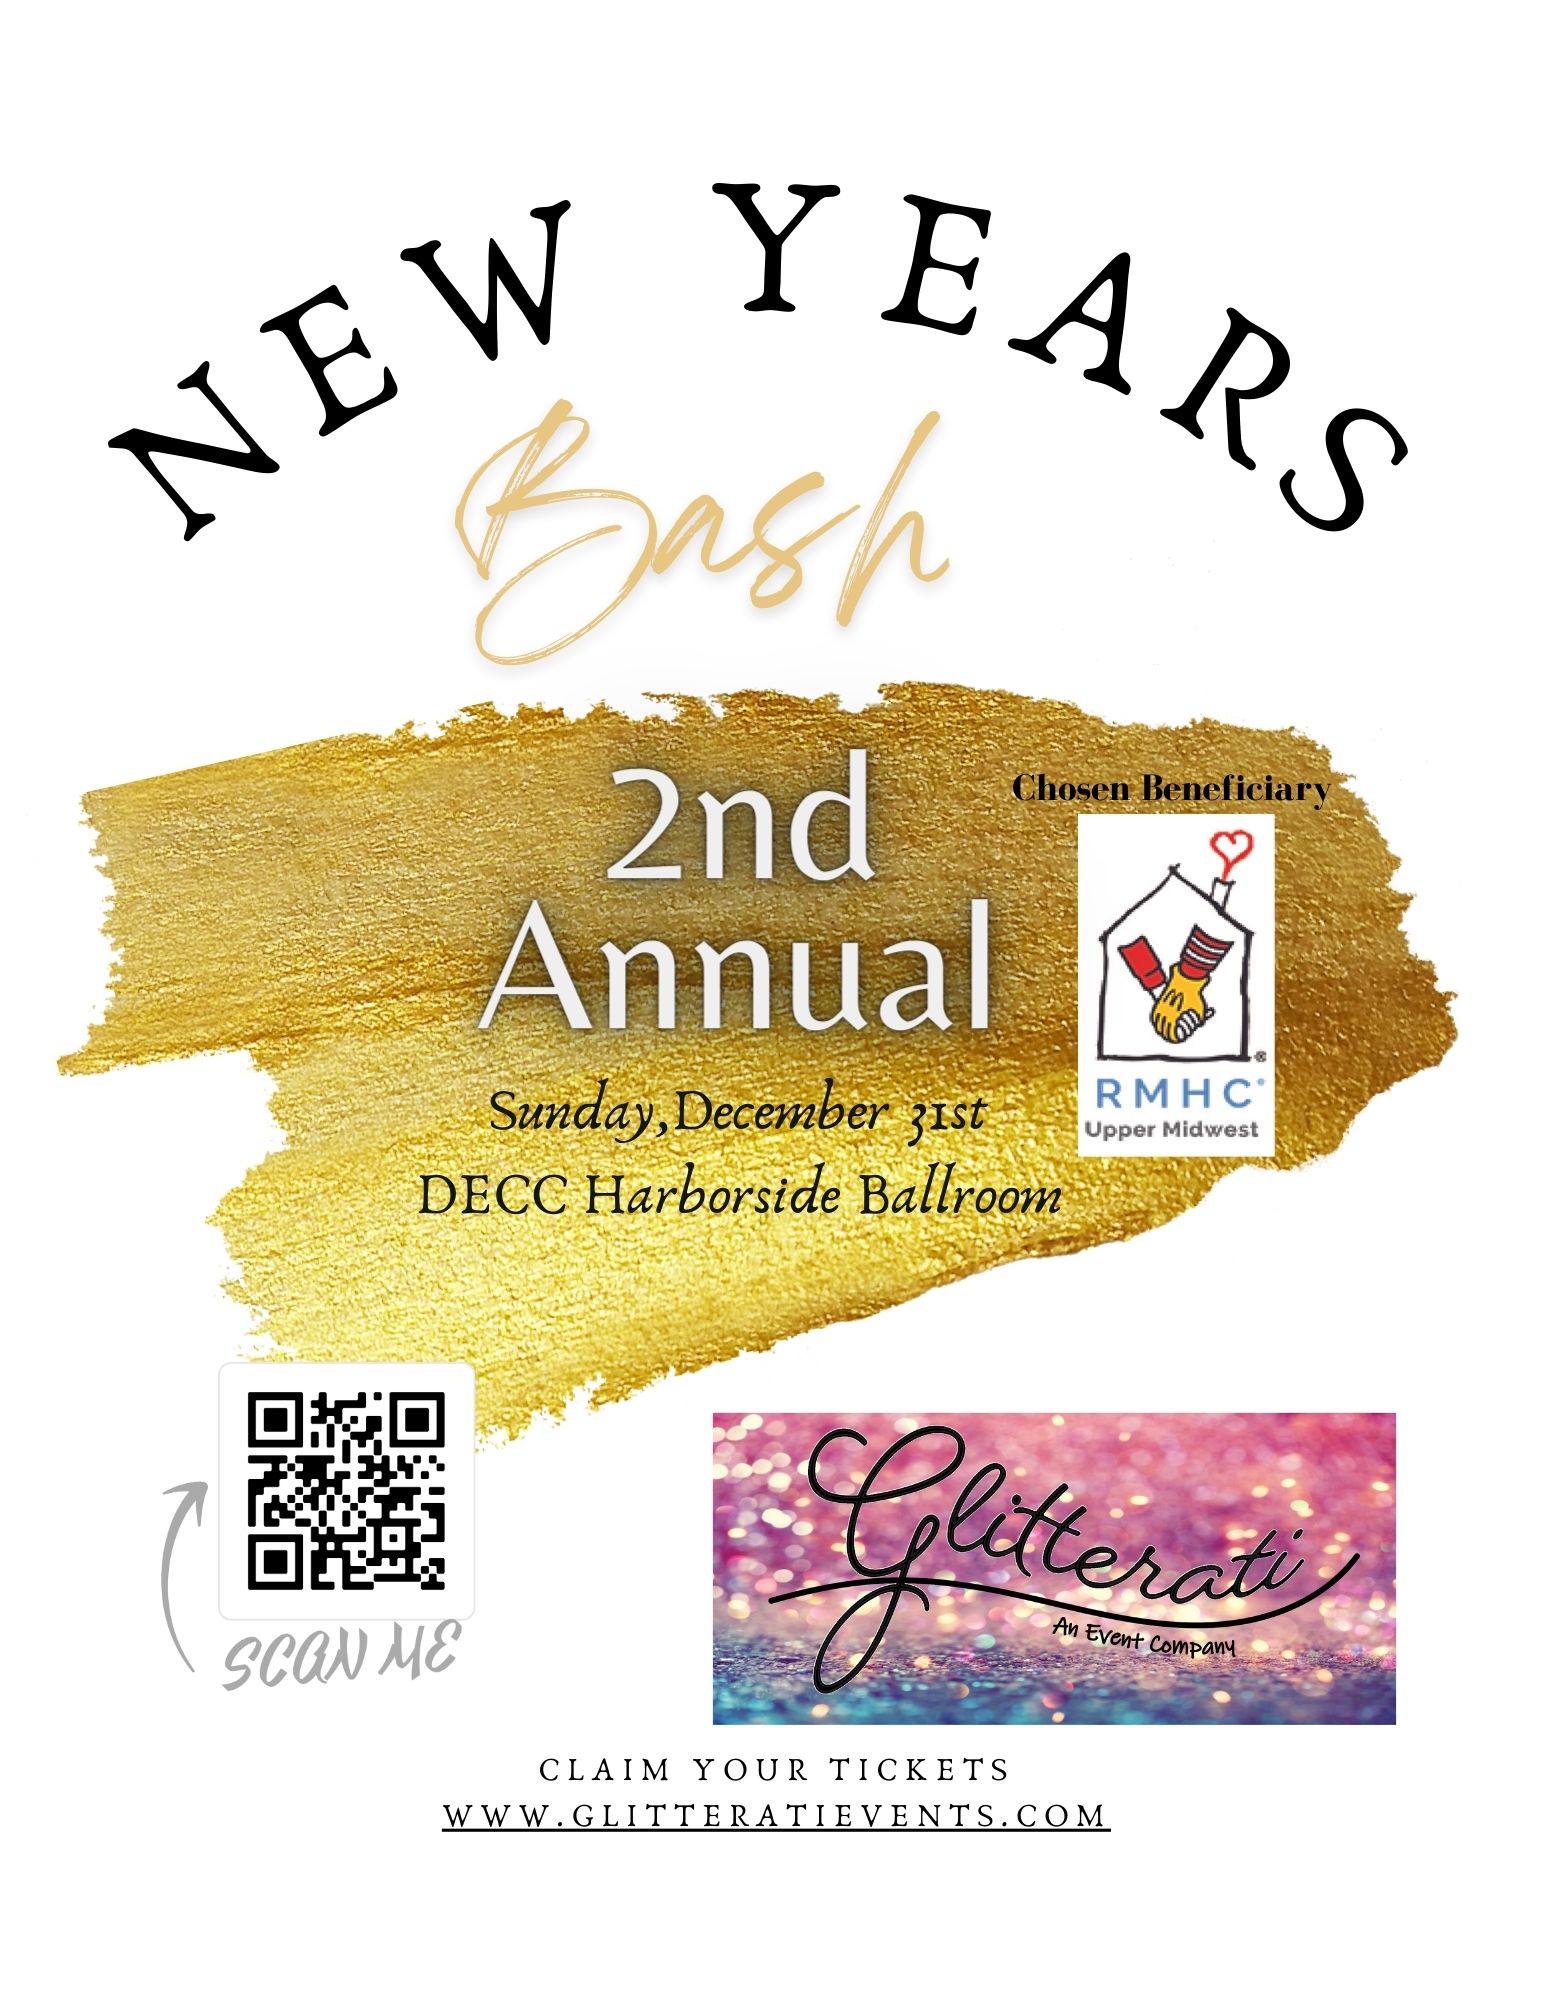 New Years Eve Bash with Glitterati • Visit Duluth